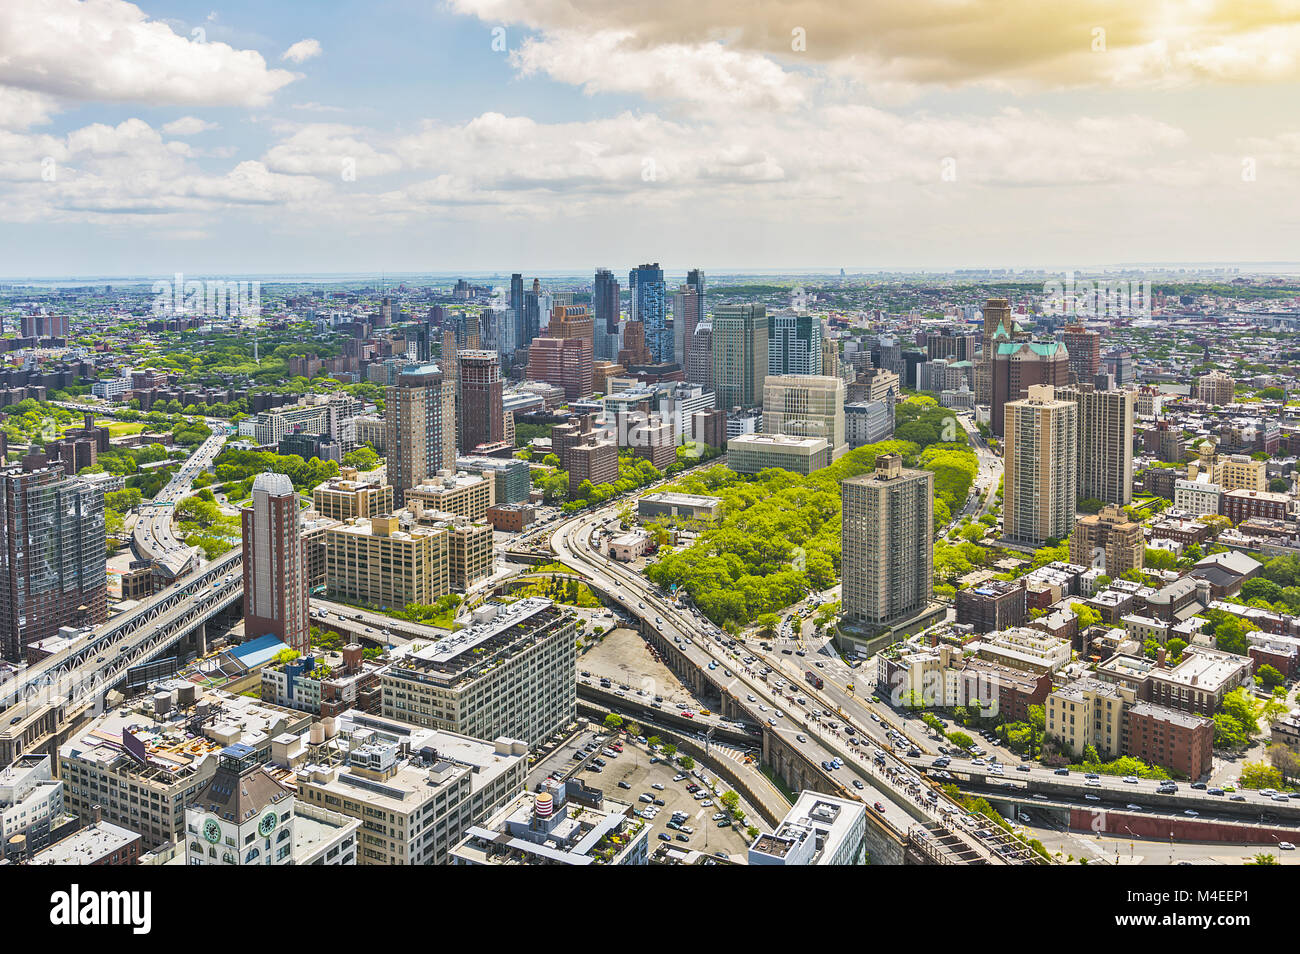 Brooklyn Heights Aerial View Stock Photo